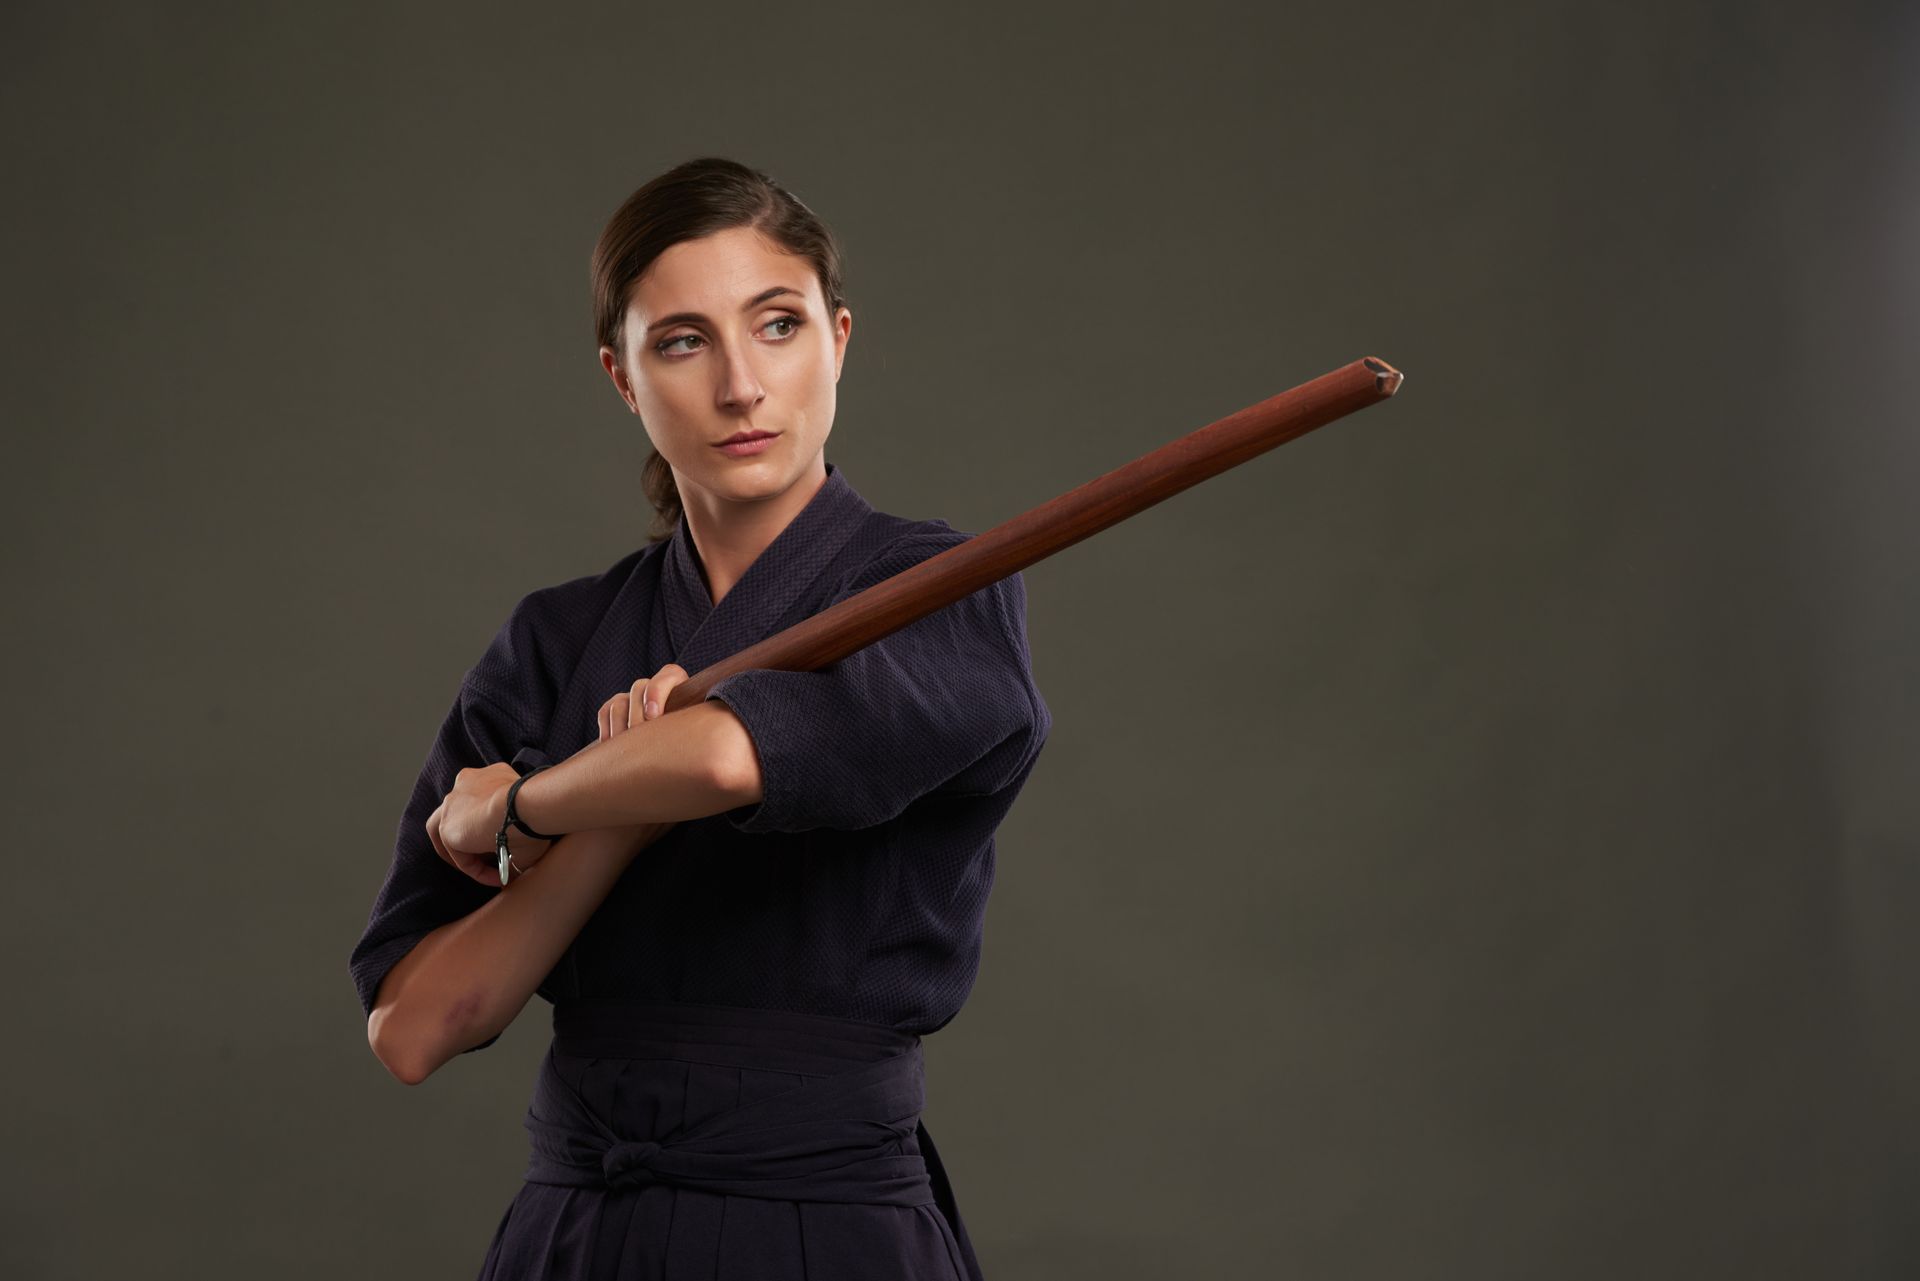 a woman in a karate uniform is holding a wooden stick .